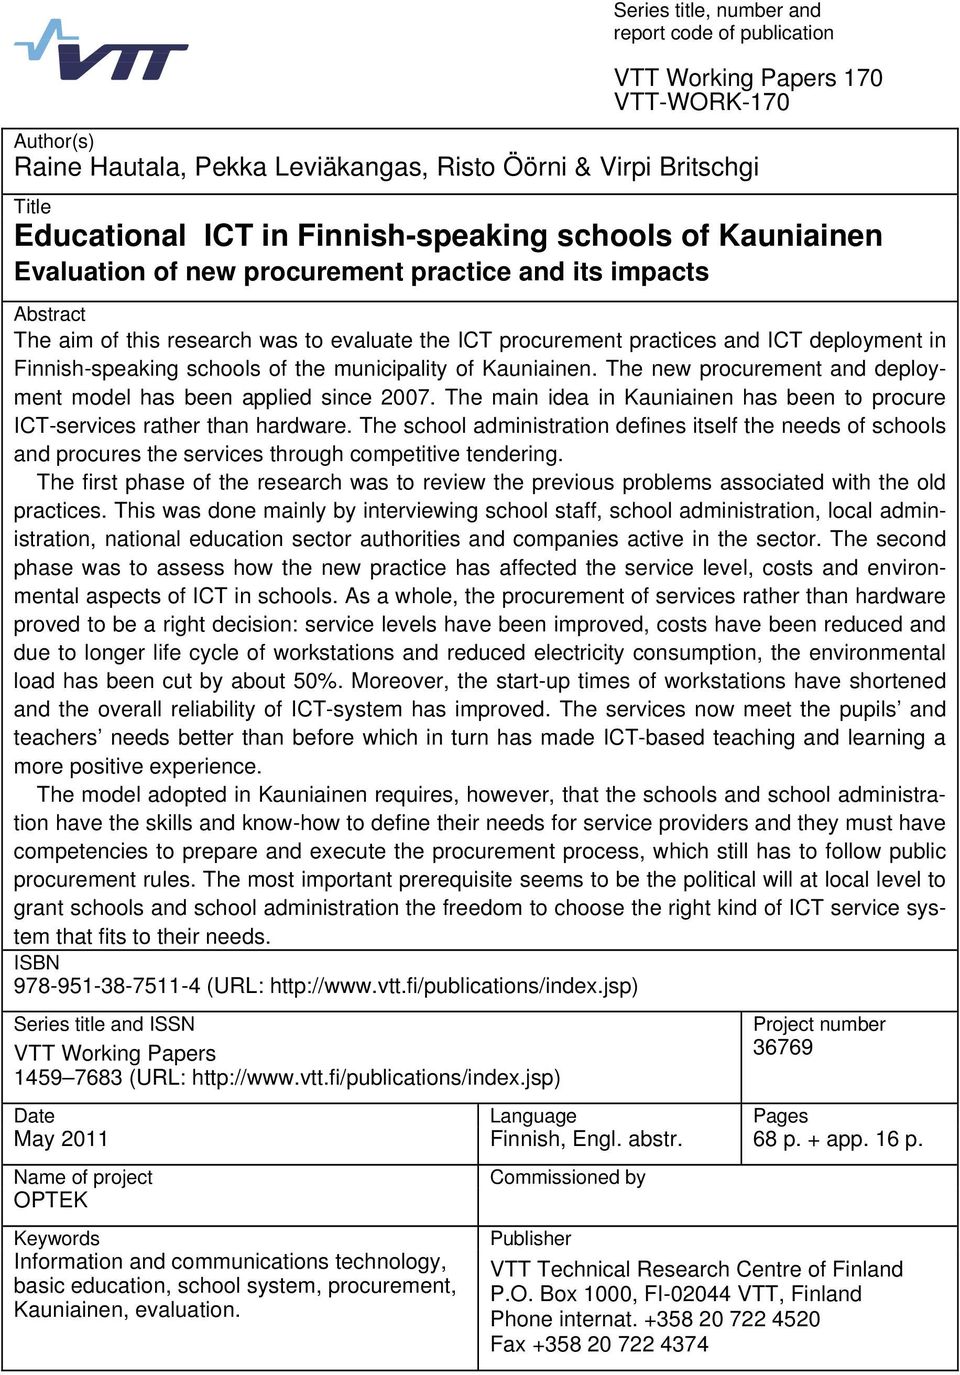 Finnish-speaking schools of the municipality of Kauniainen. The new procurement and deployment model has been applied since 2007.